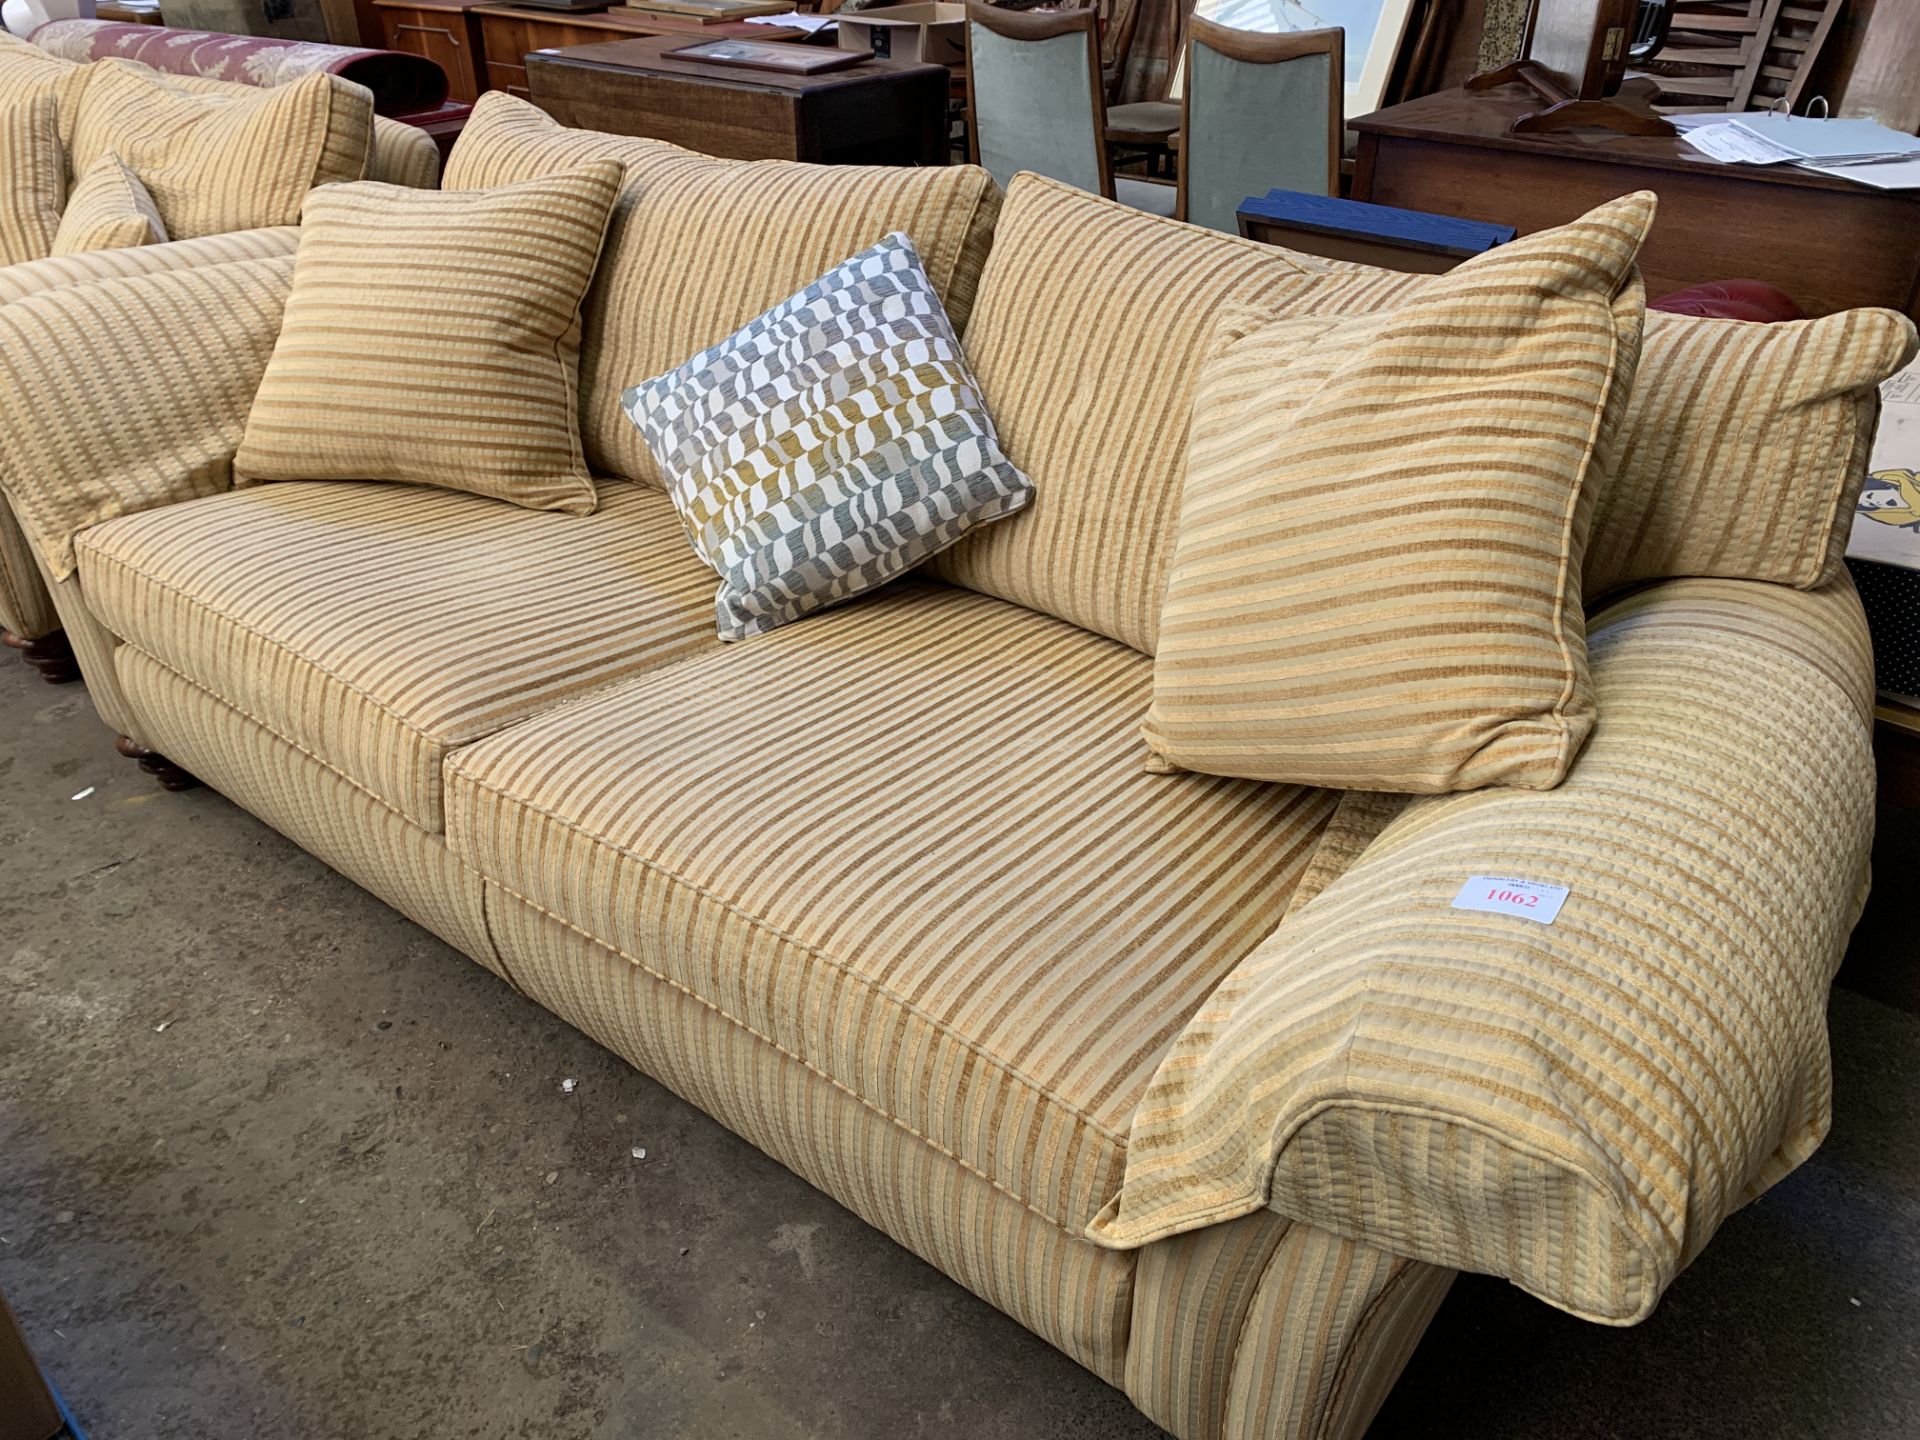 Three seat sofa upholstered in gold coloured striped fabric